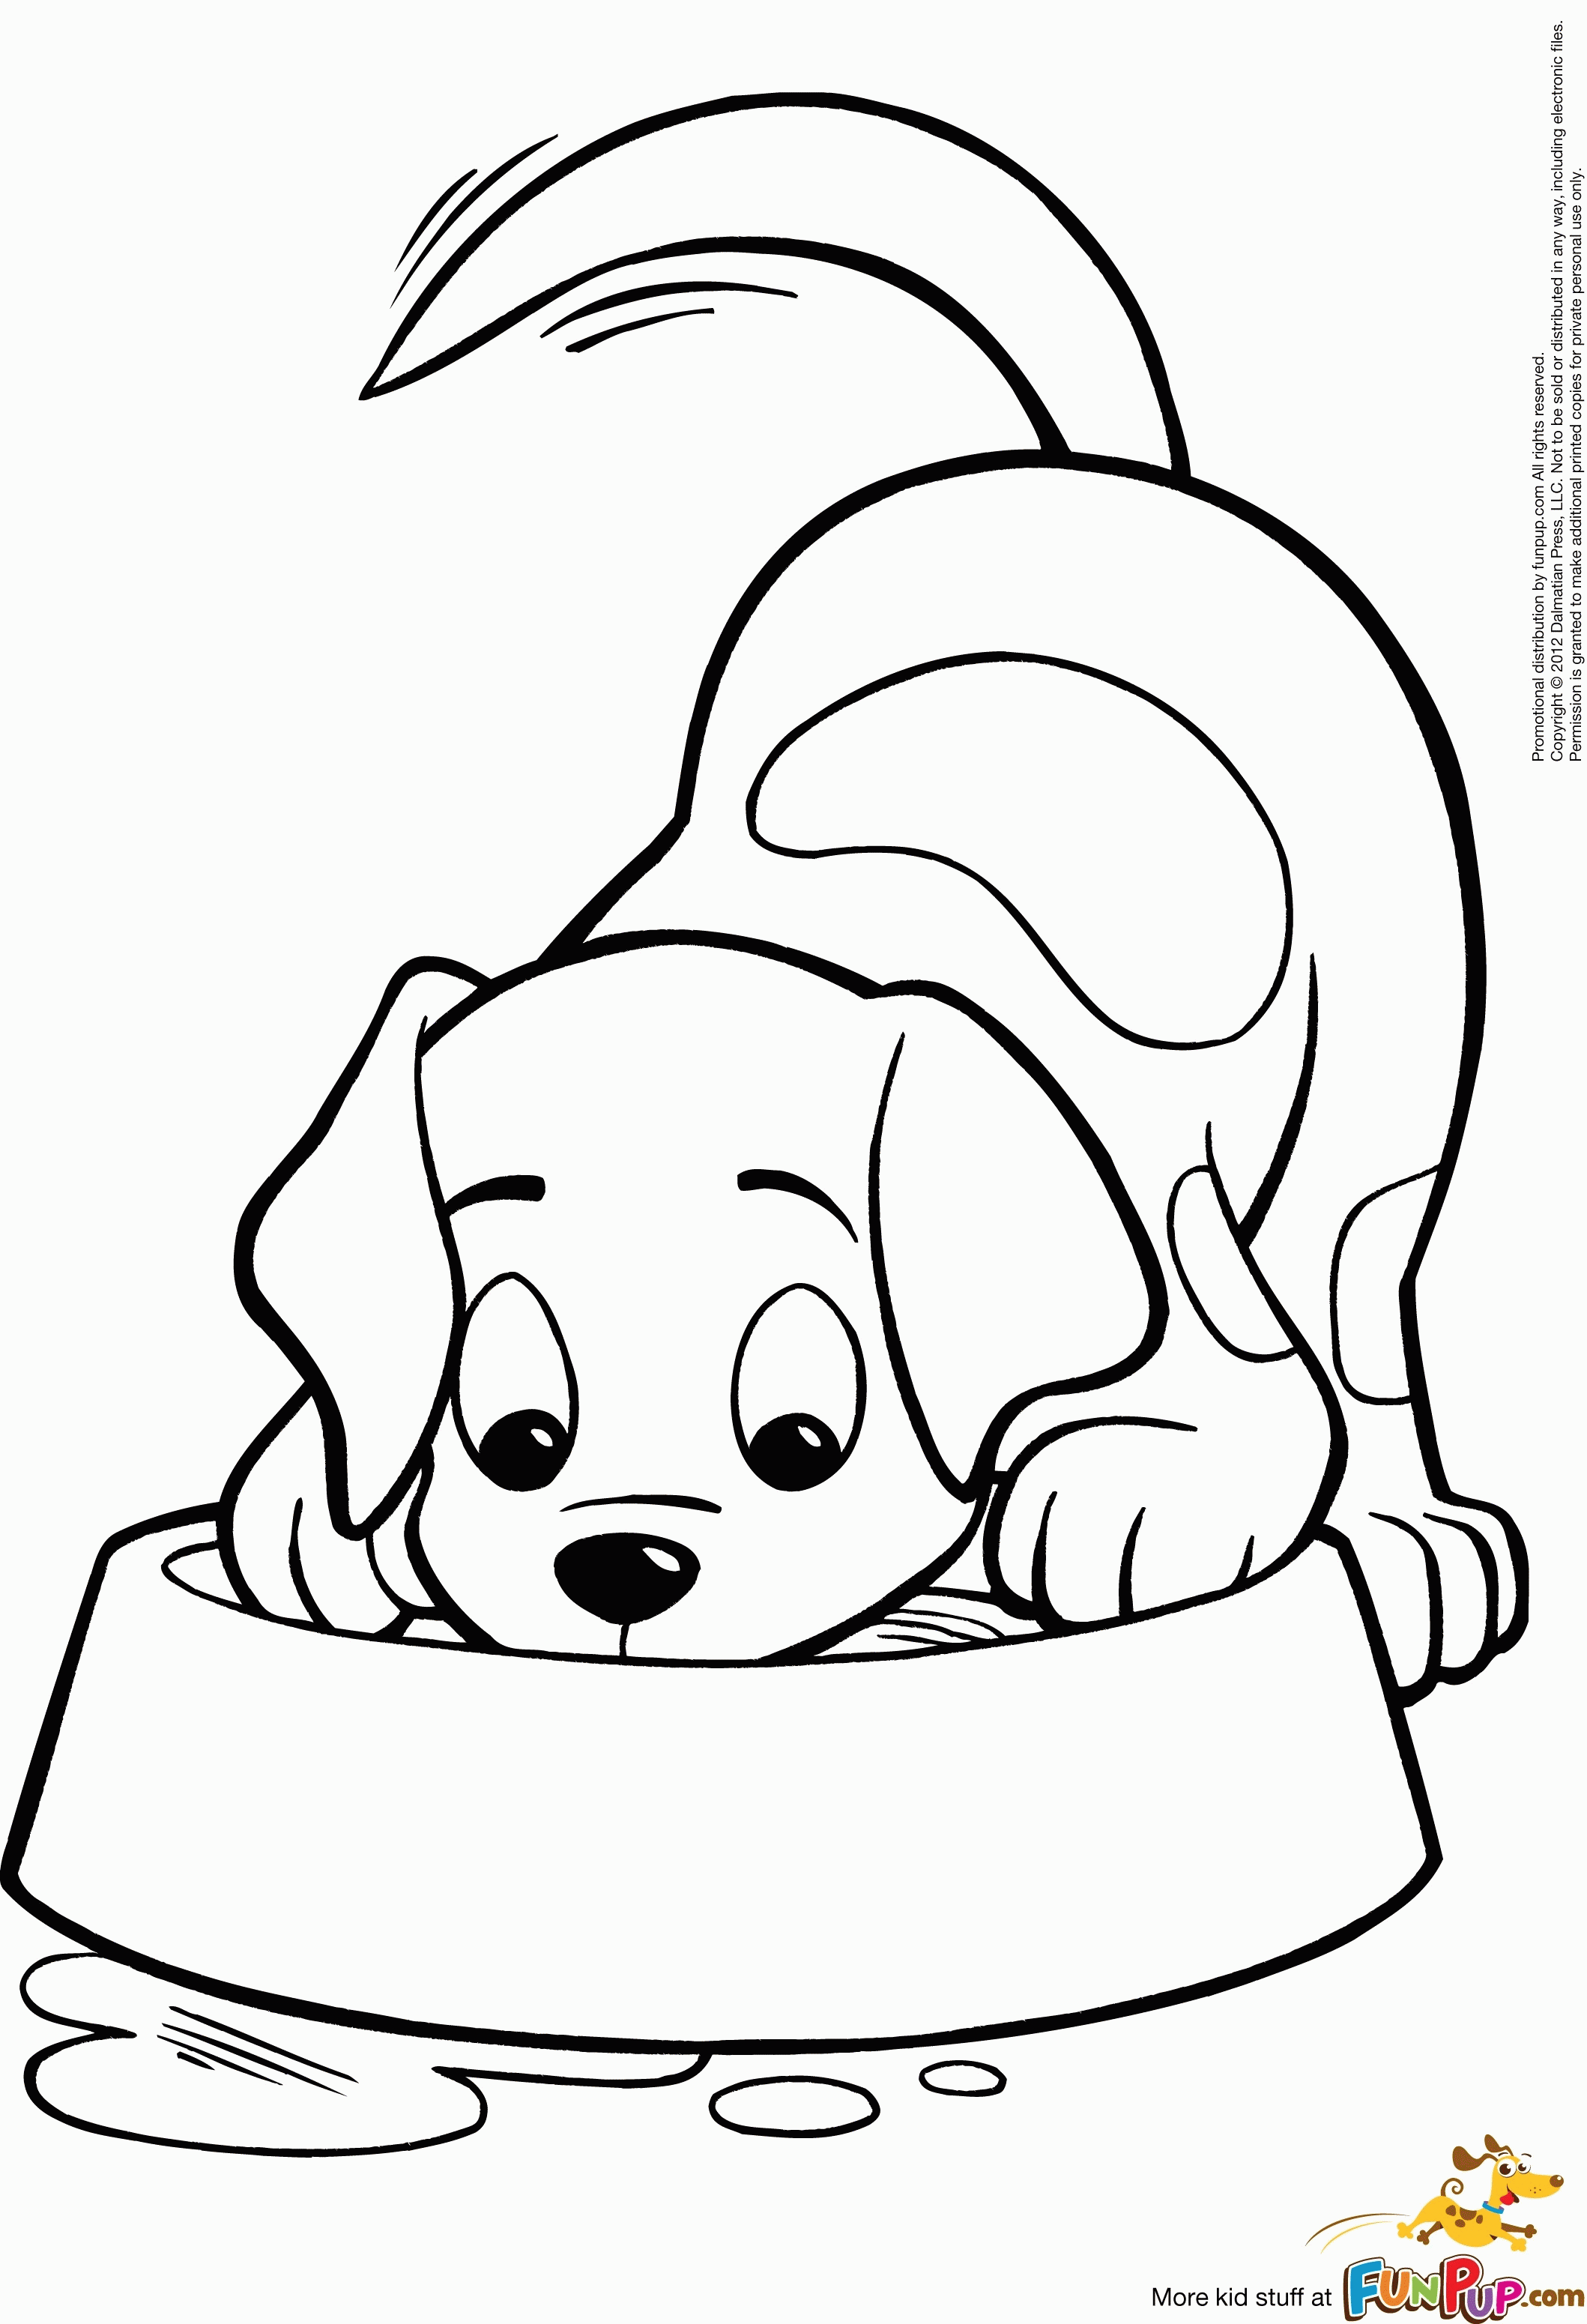 Puppy Colouring Pages Online Puppy Coloring Page Puppy Coloring - Coloring Home